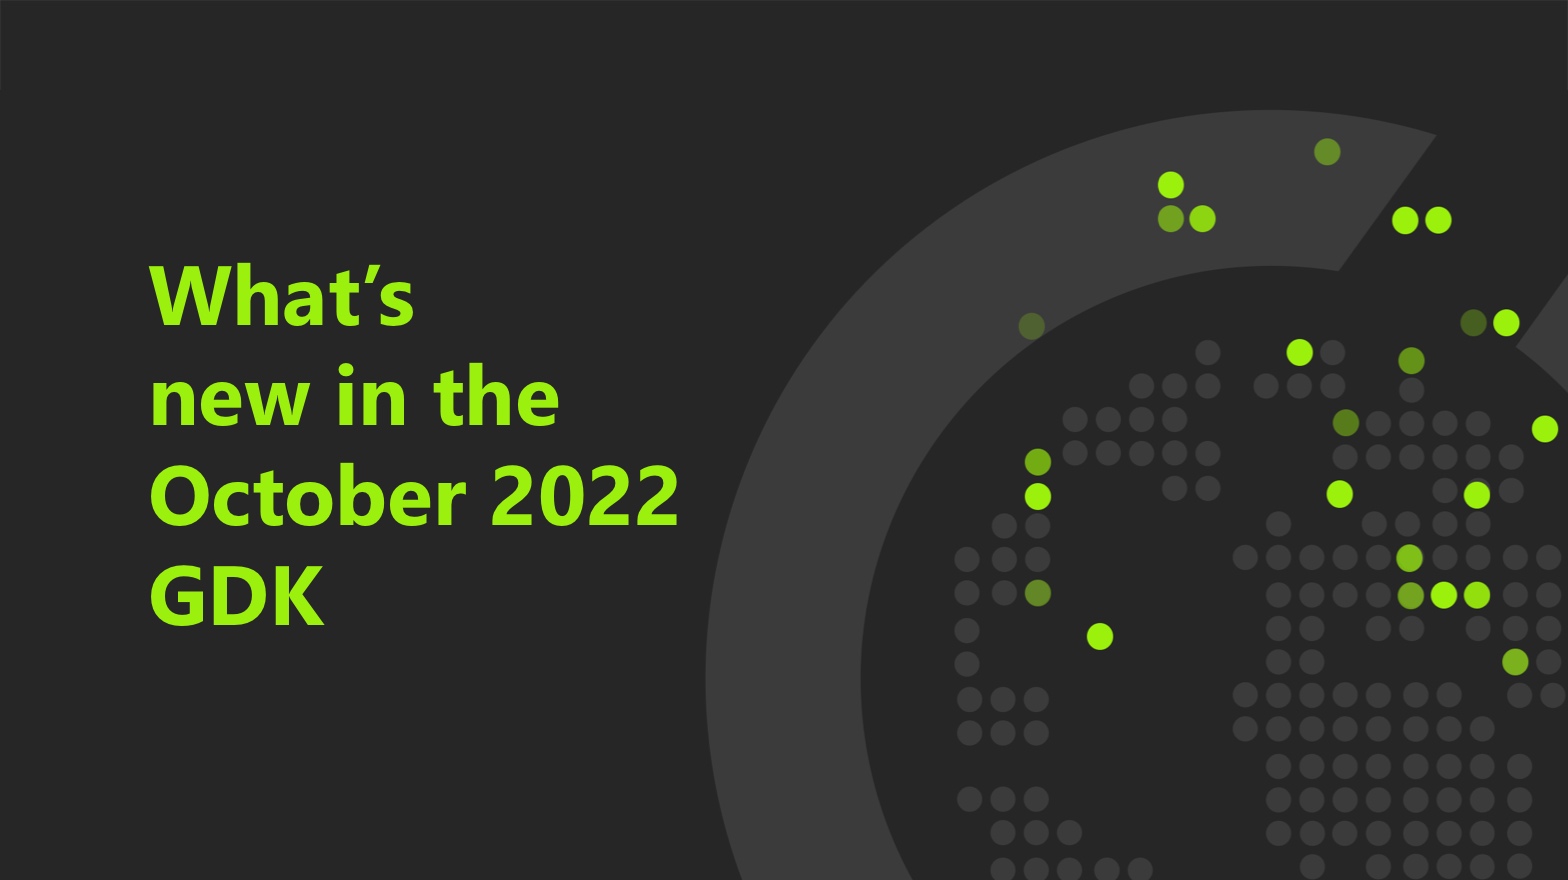 green text reading "what's new in the October 2022 GDK" on a black background